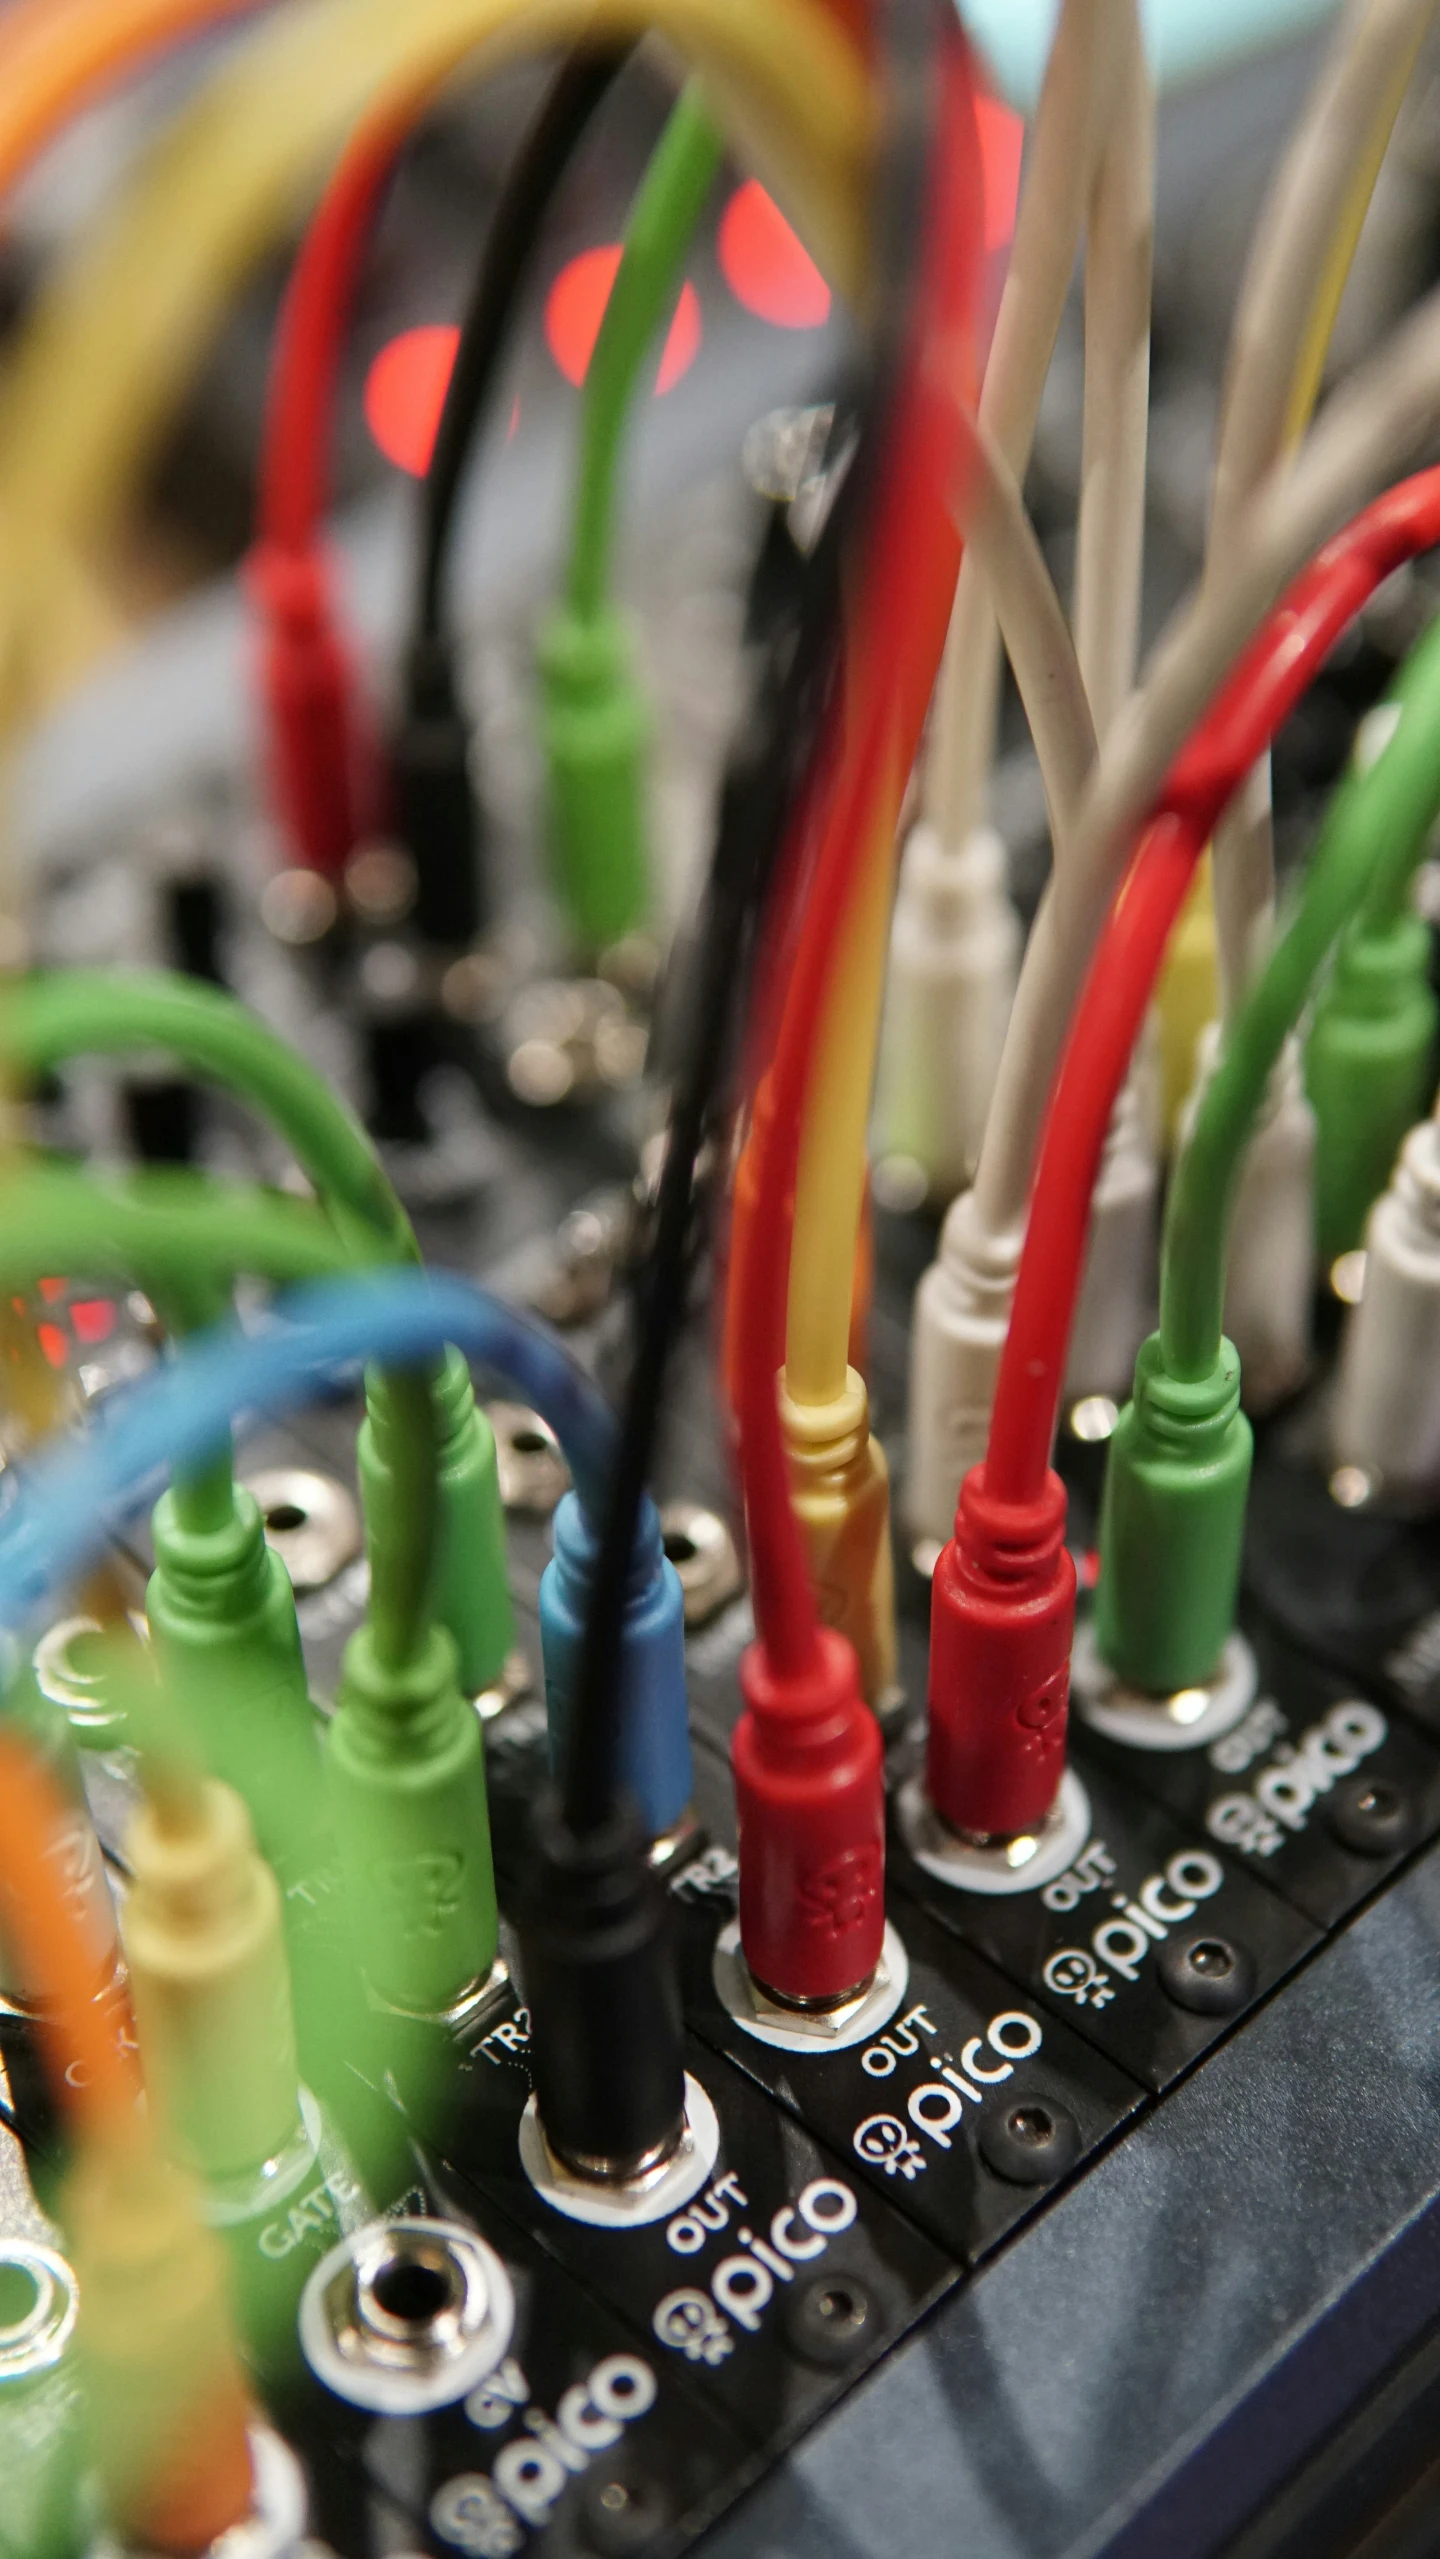 a close up of a computer board showing cables and wires